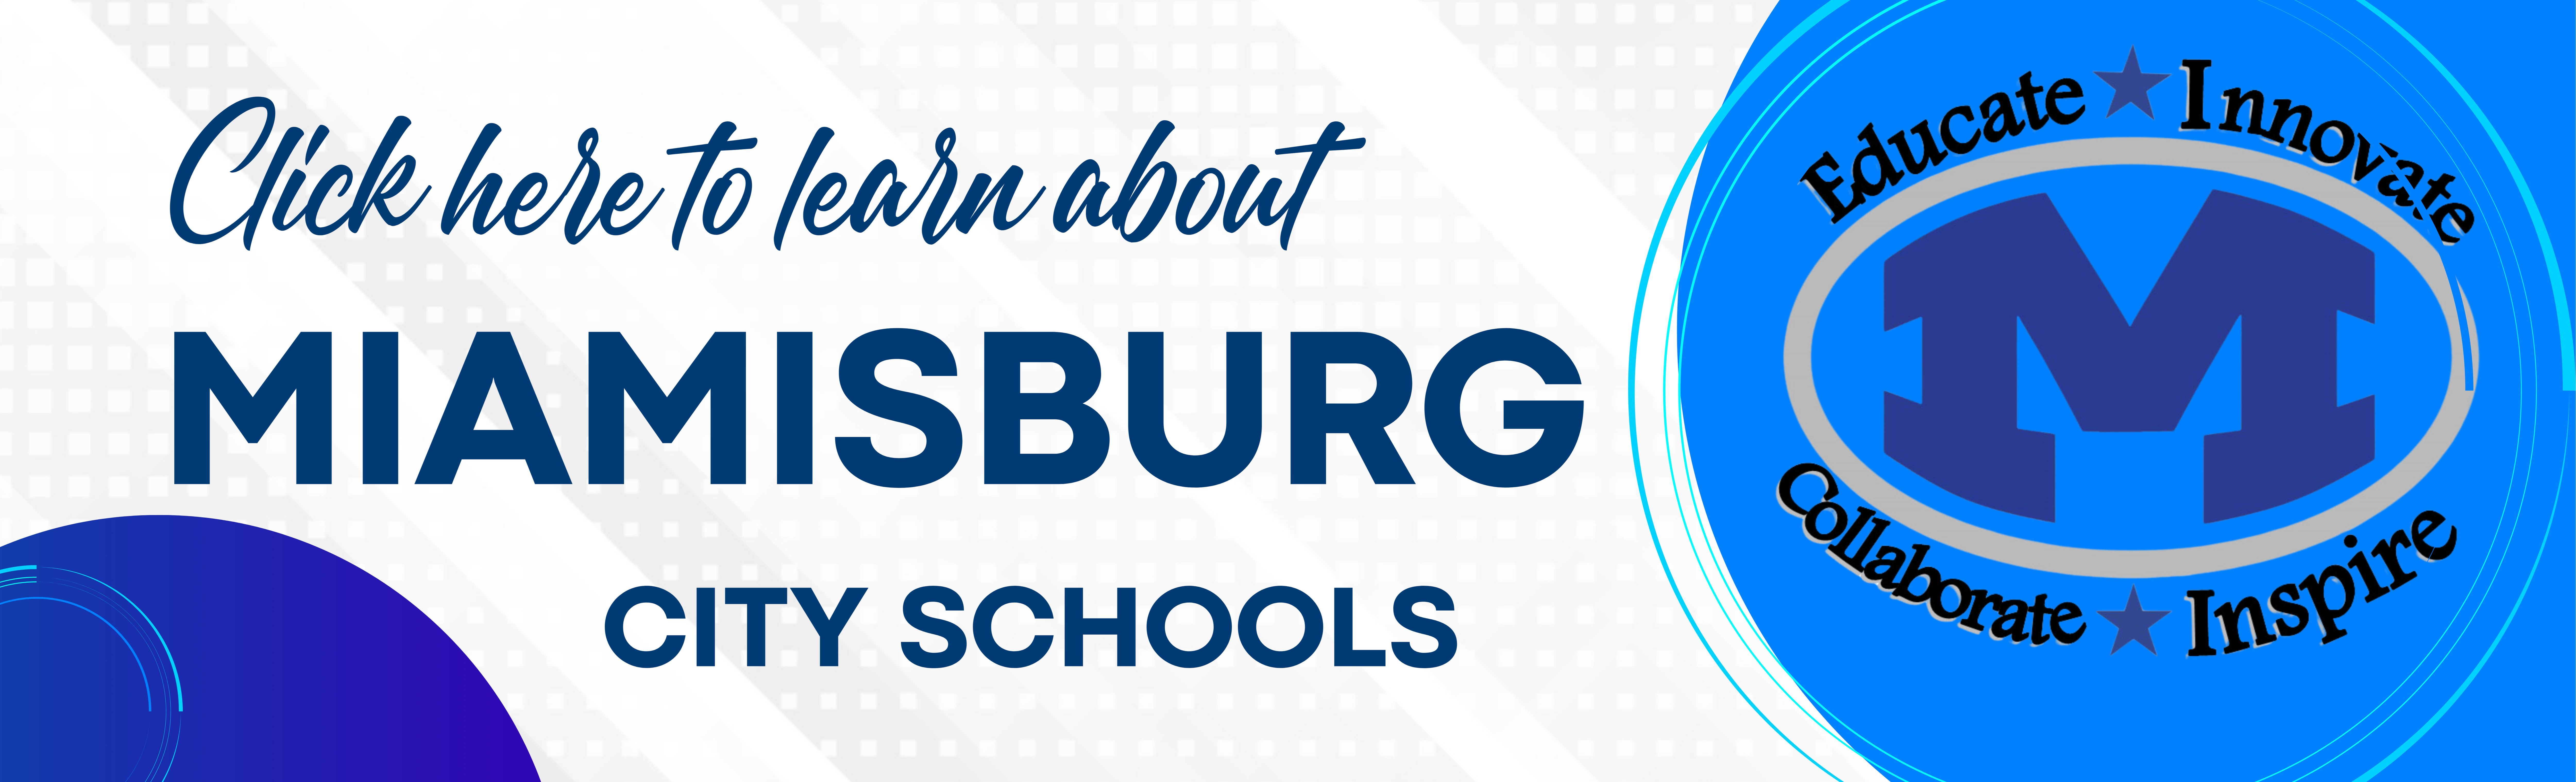 Learn About Miamisburg City Schools